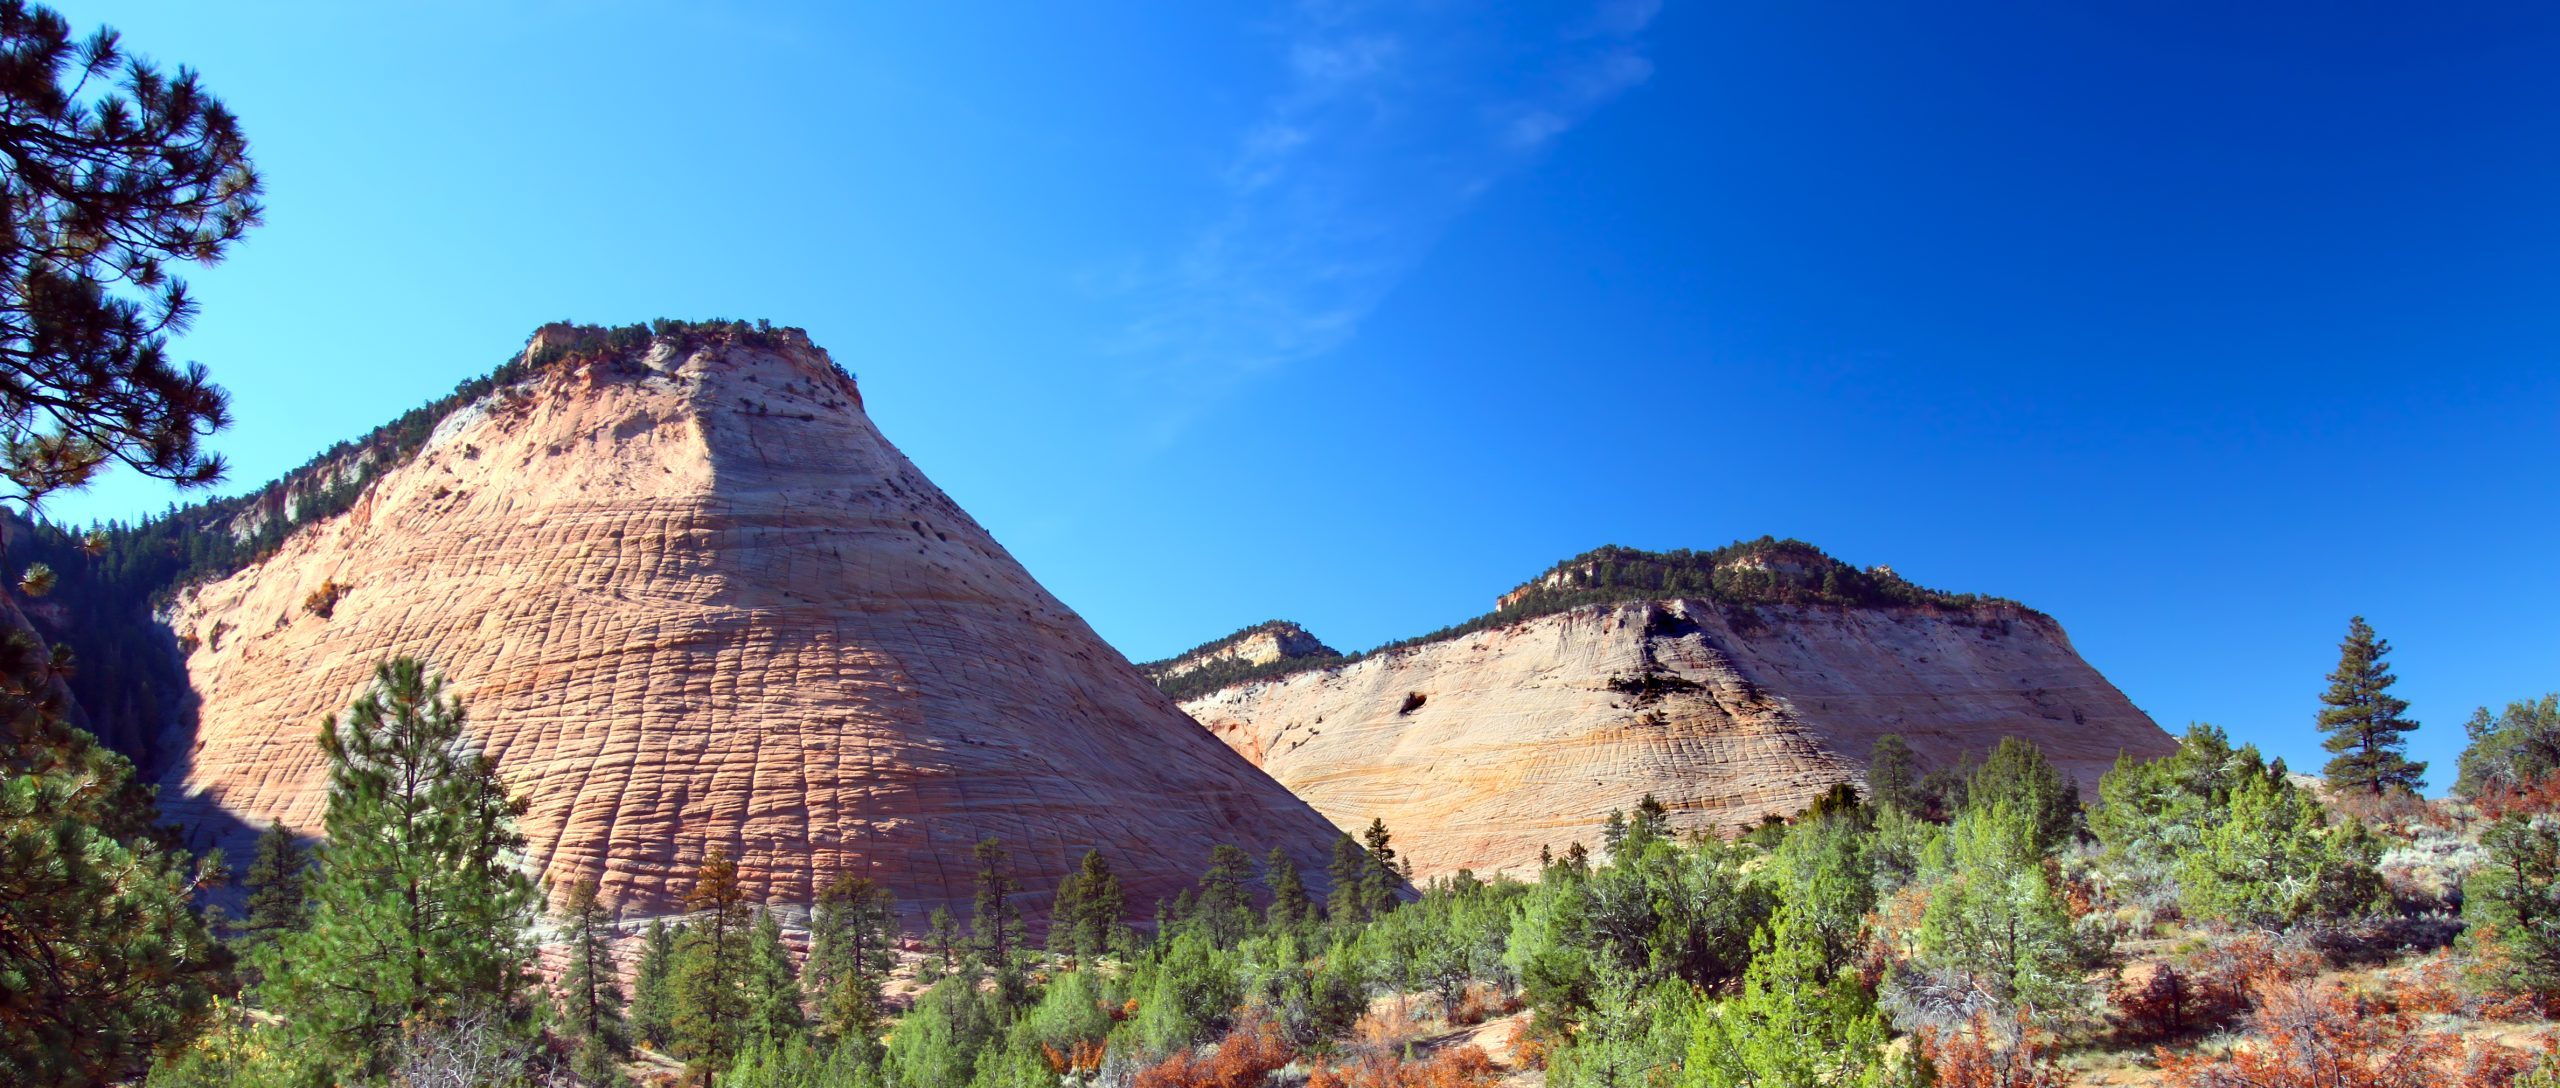 Zion National Park Self-Guided Tour